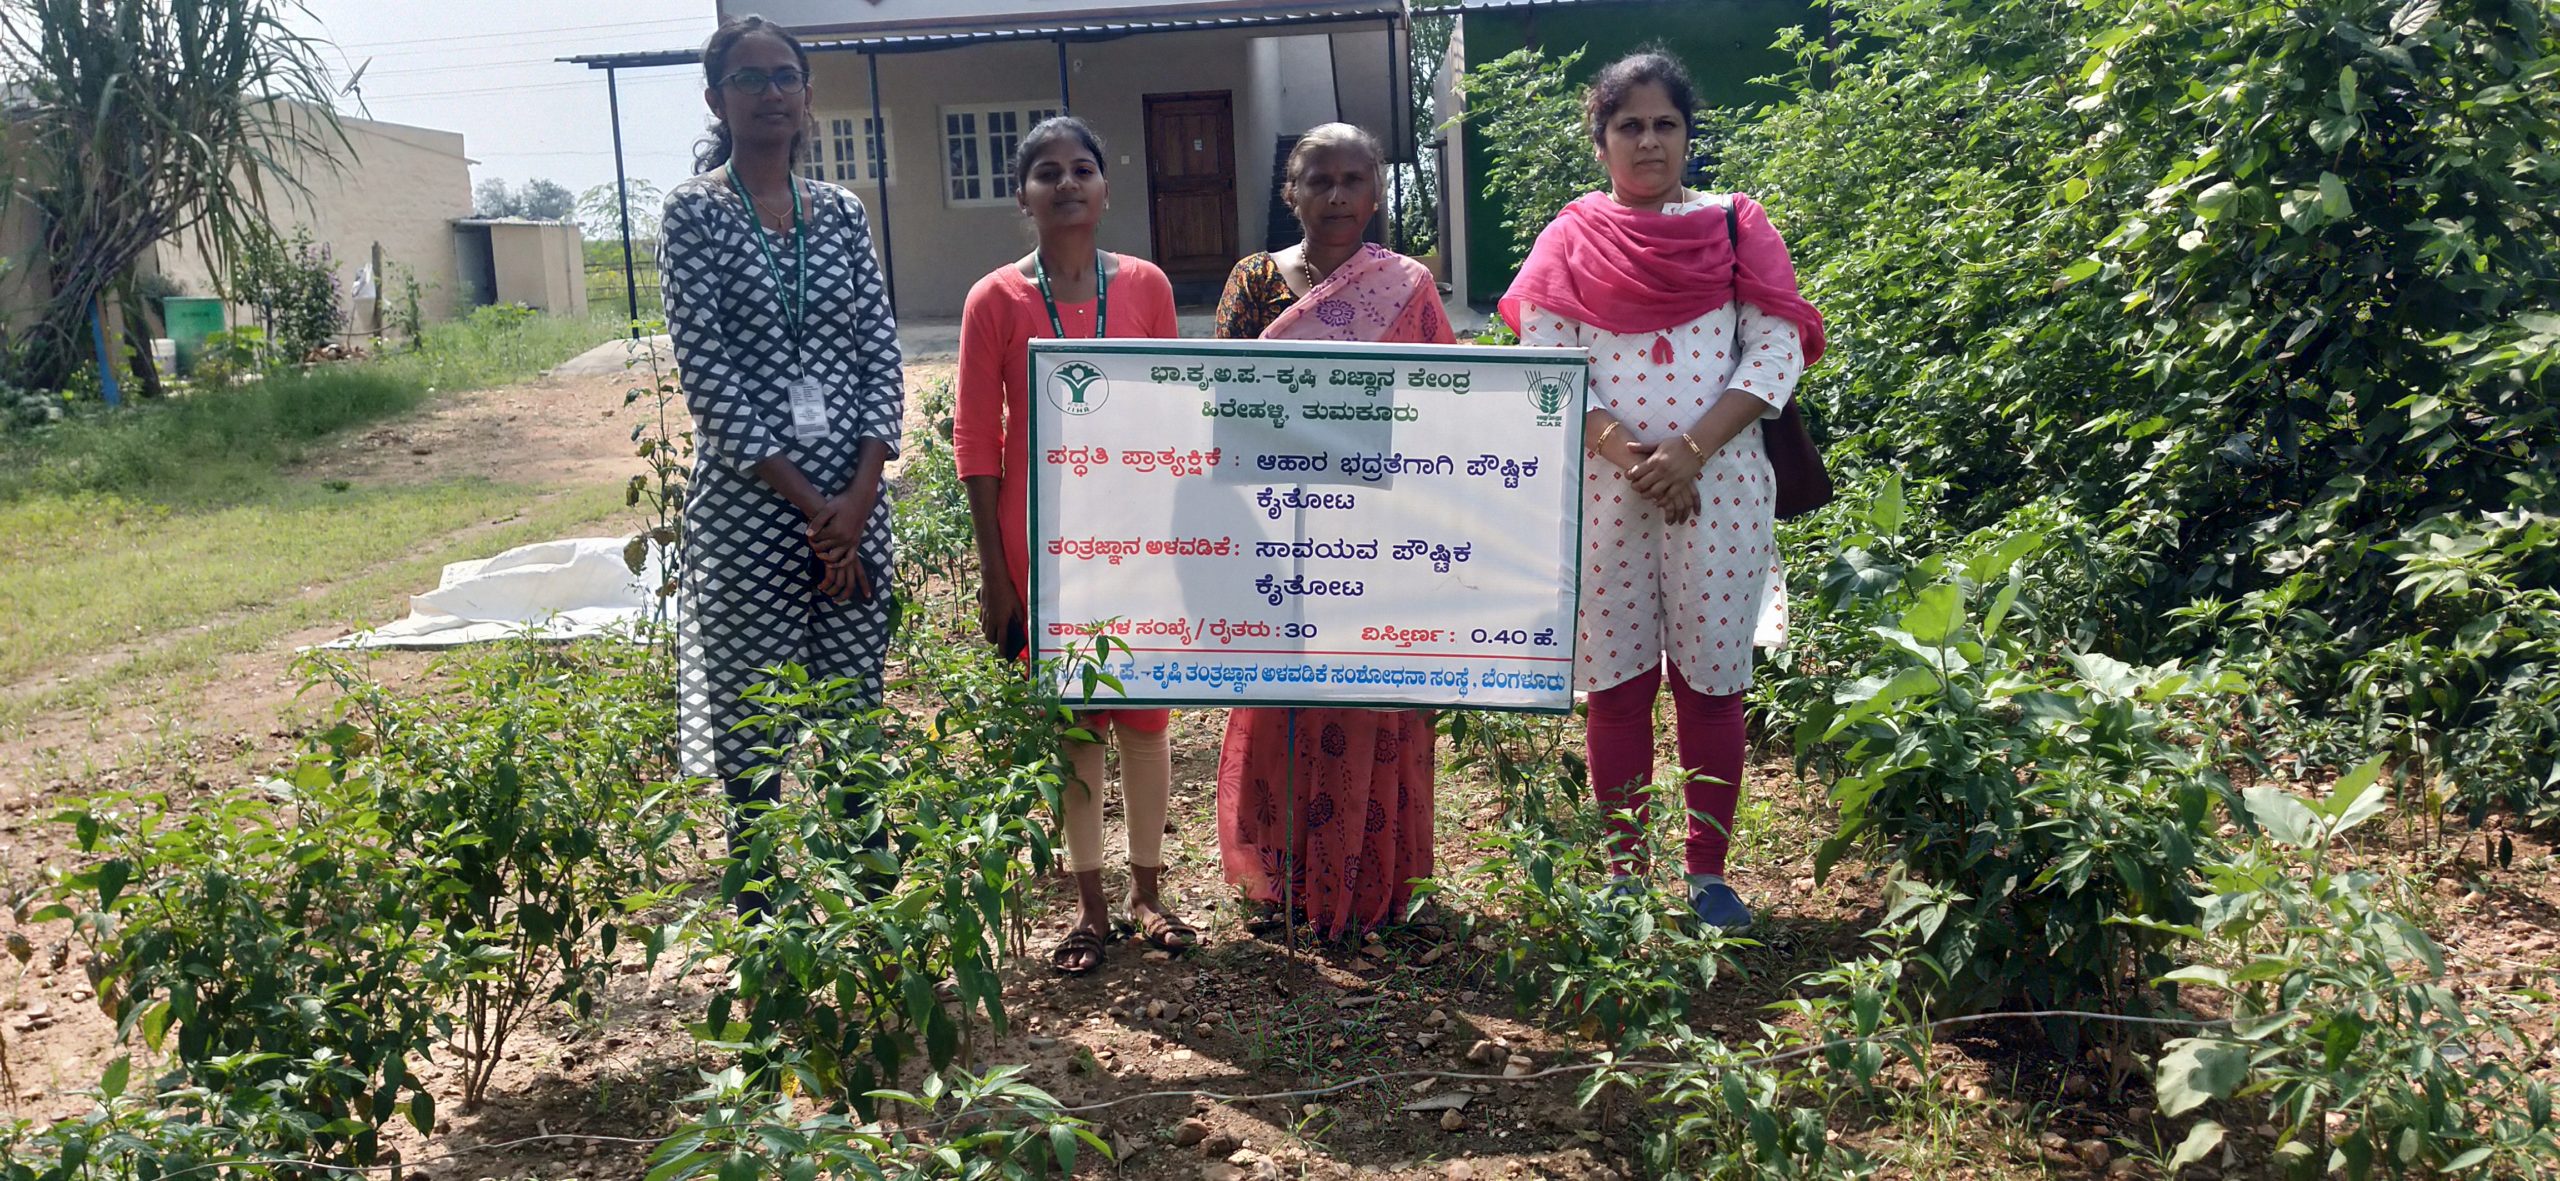 Visit to FLD and Nutri garden plots